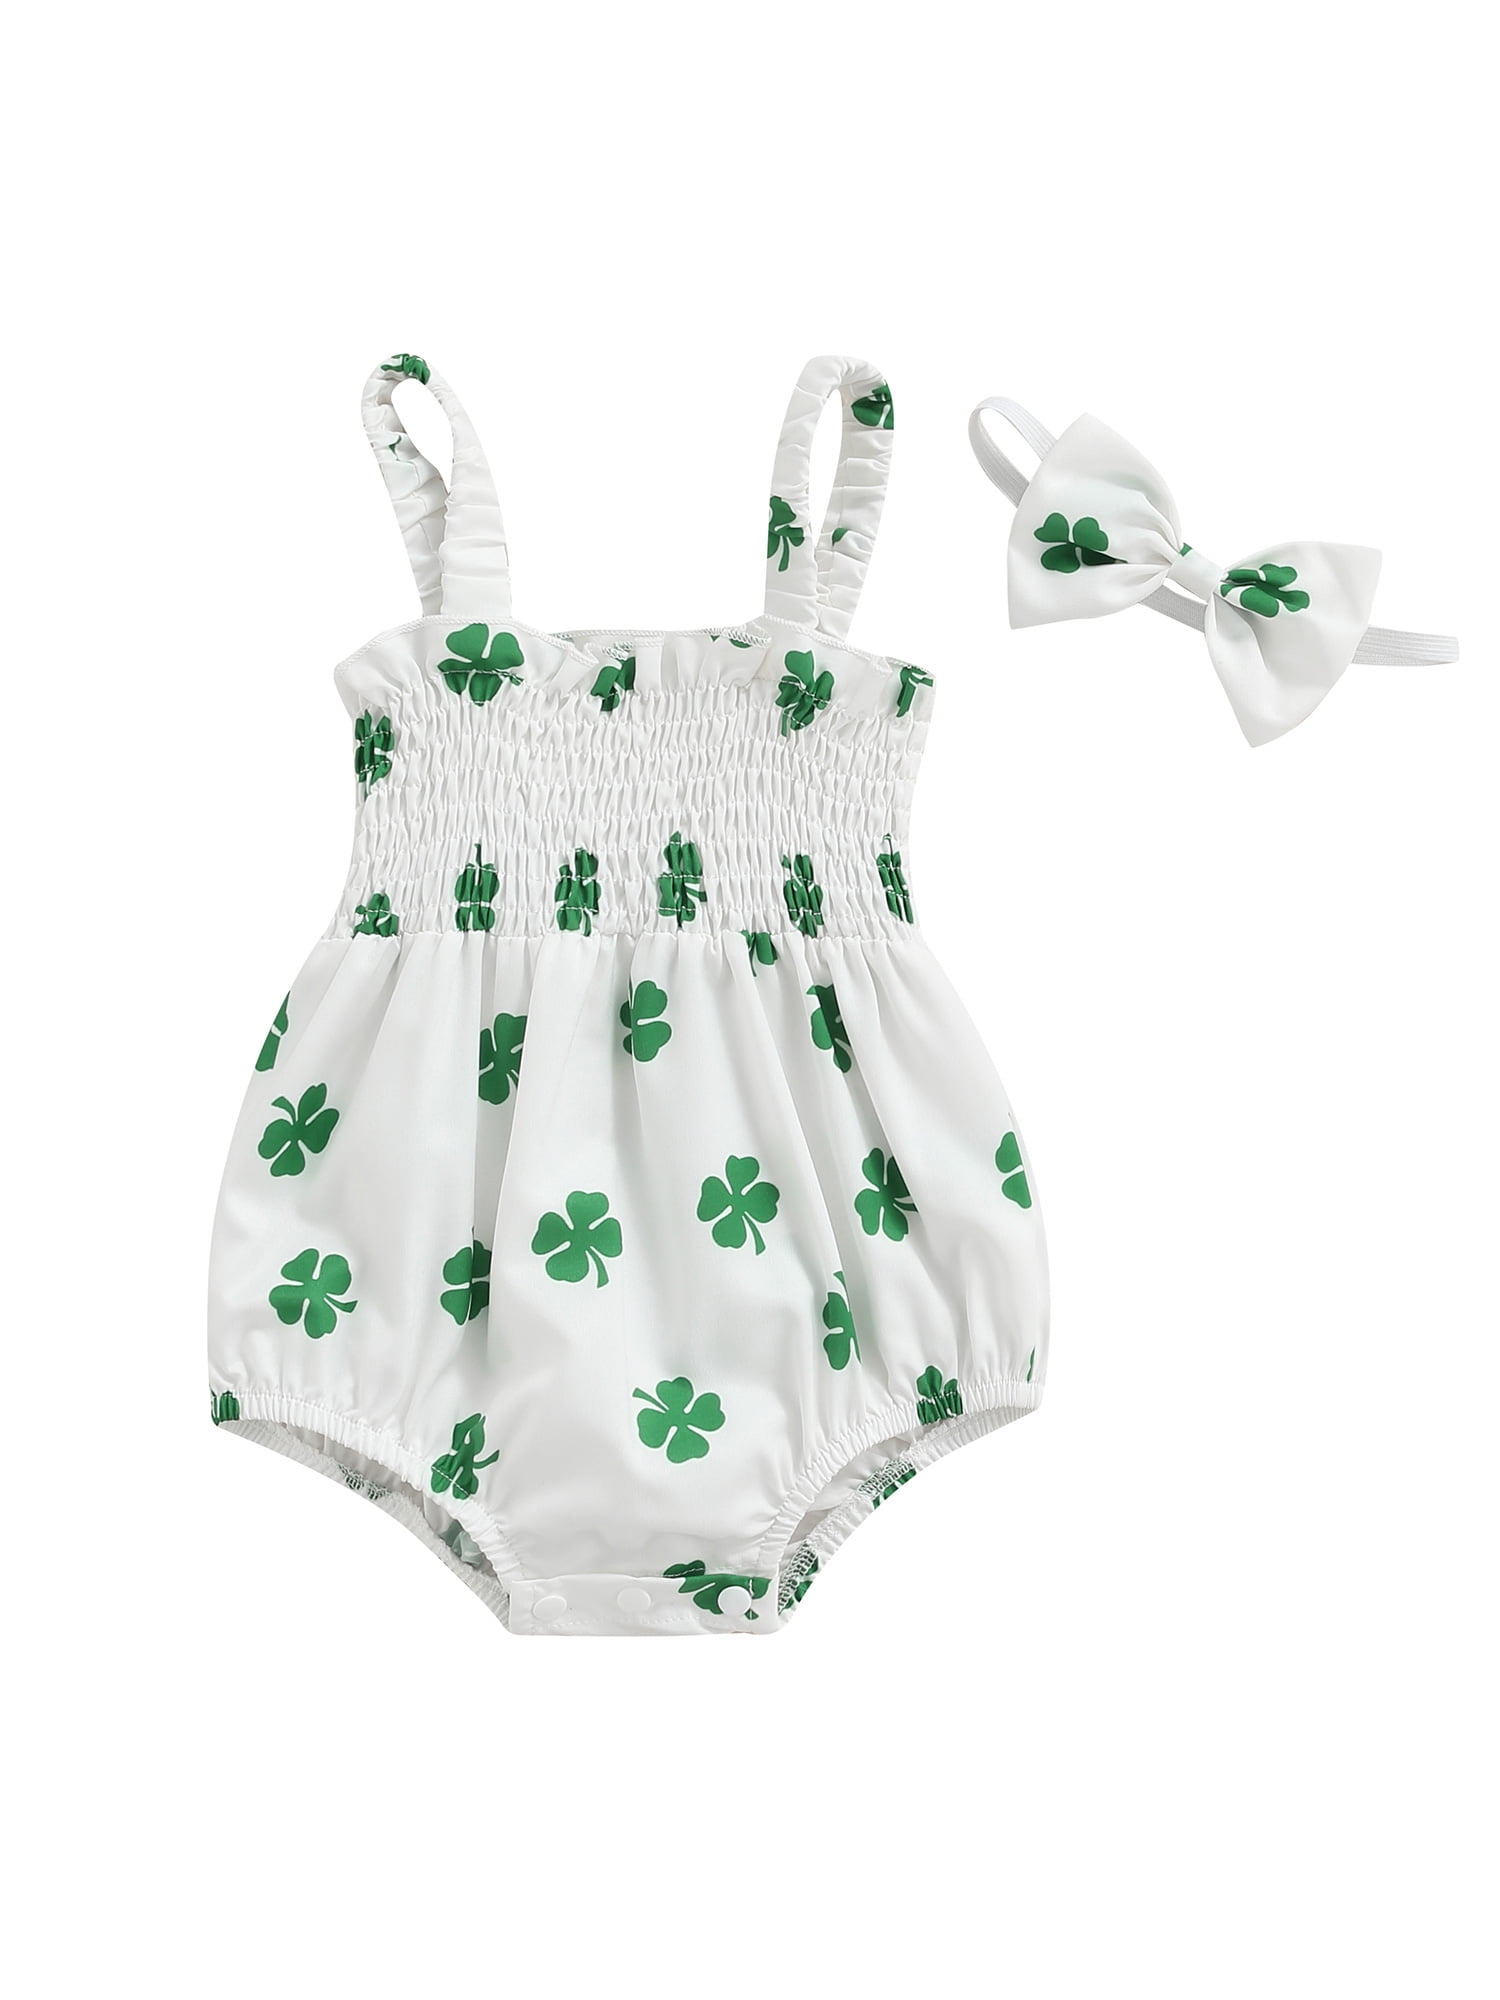 4Clovers Baby Girls Romper Infant Toddler Ruffled Floral Casual Strap Jumpsuit Outfit Clothes with Headbabd